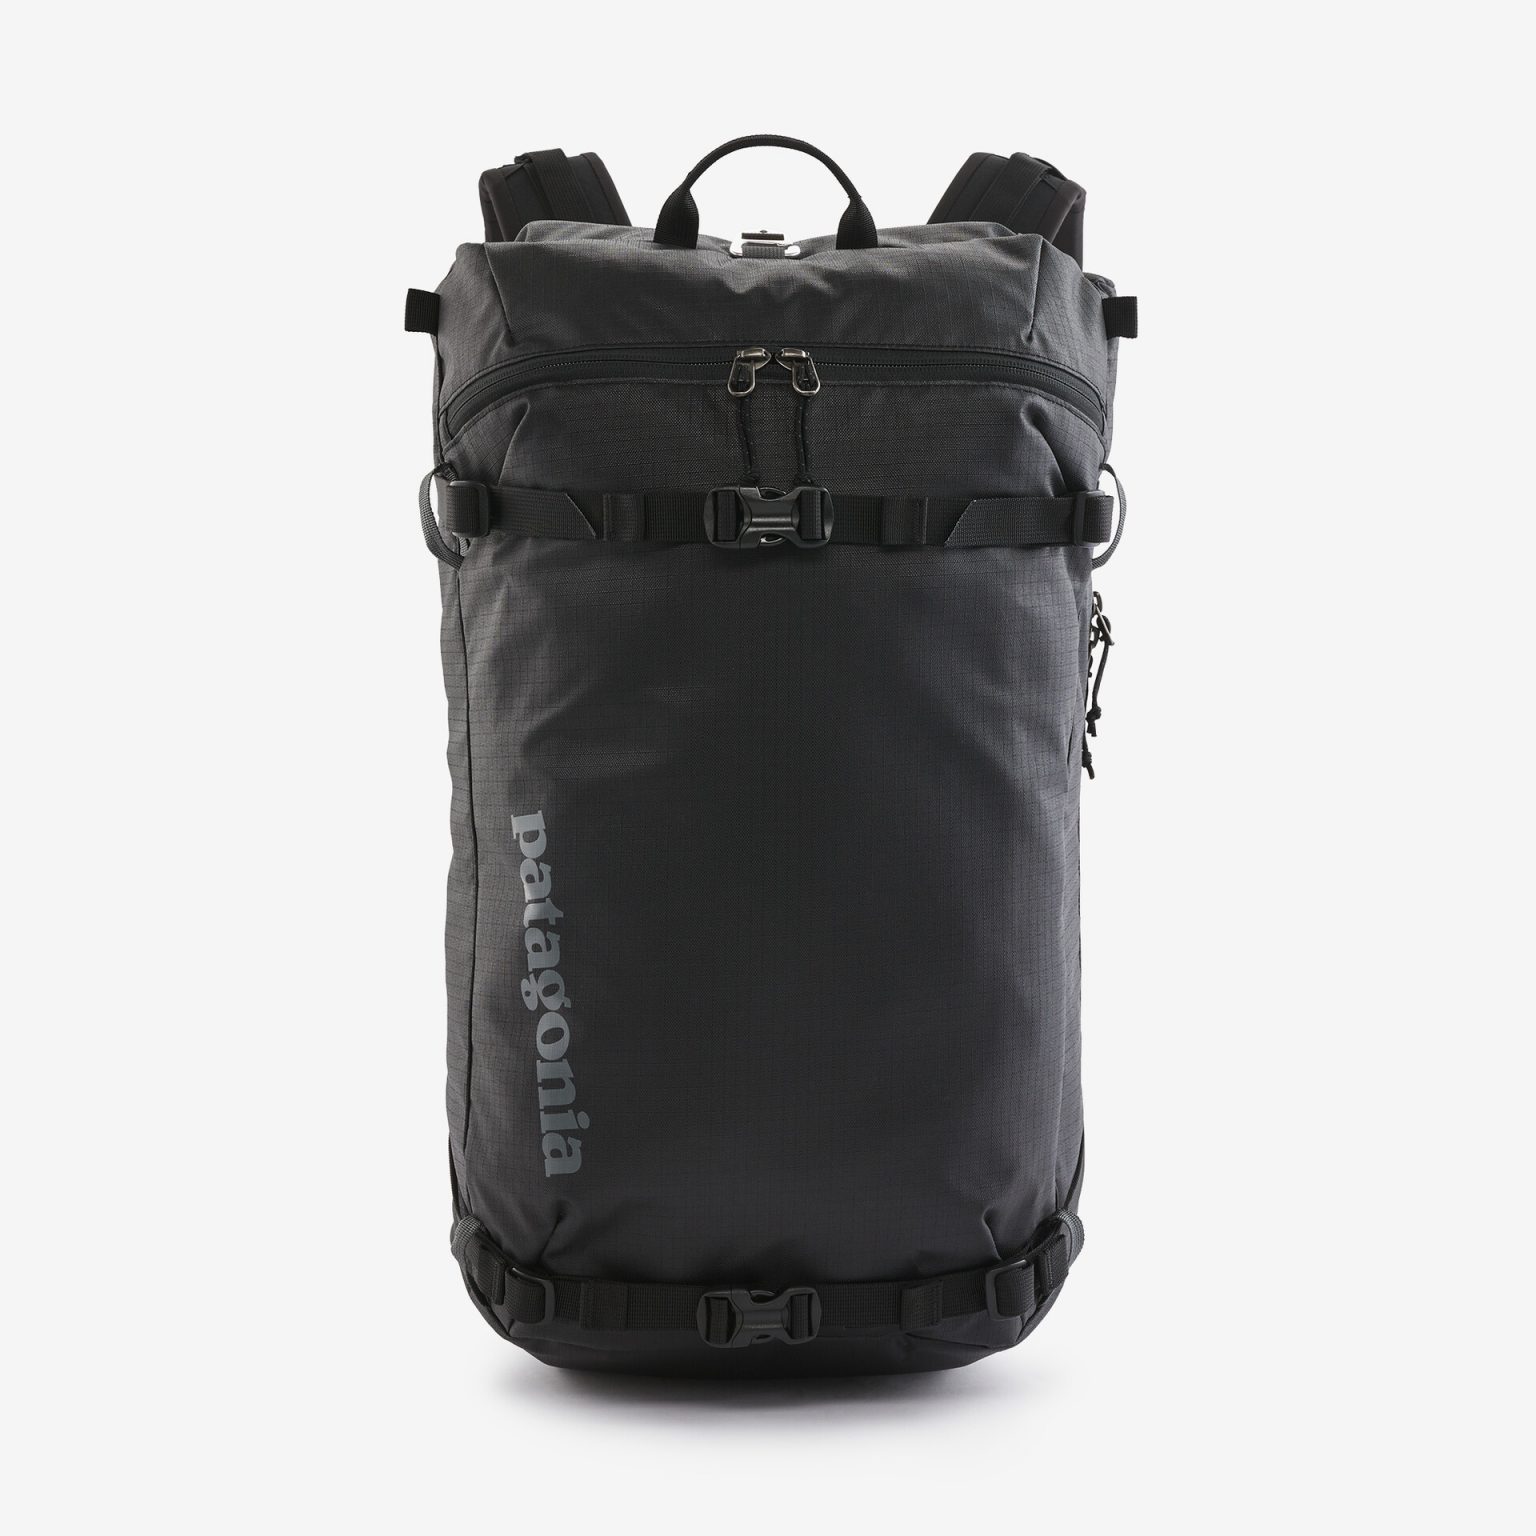 Patagonia Descensionist 40L Backpack Review | The Inertia